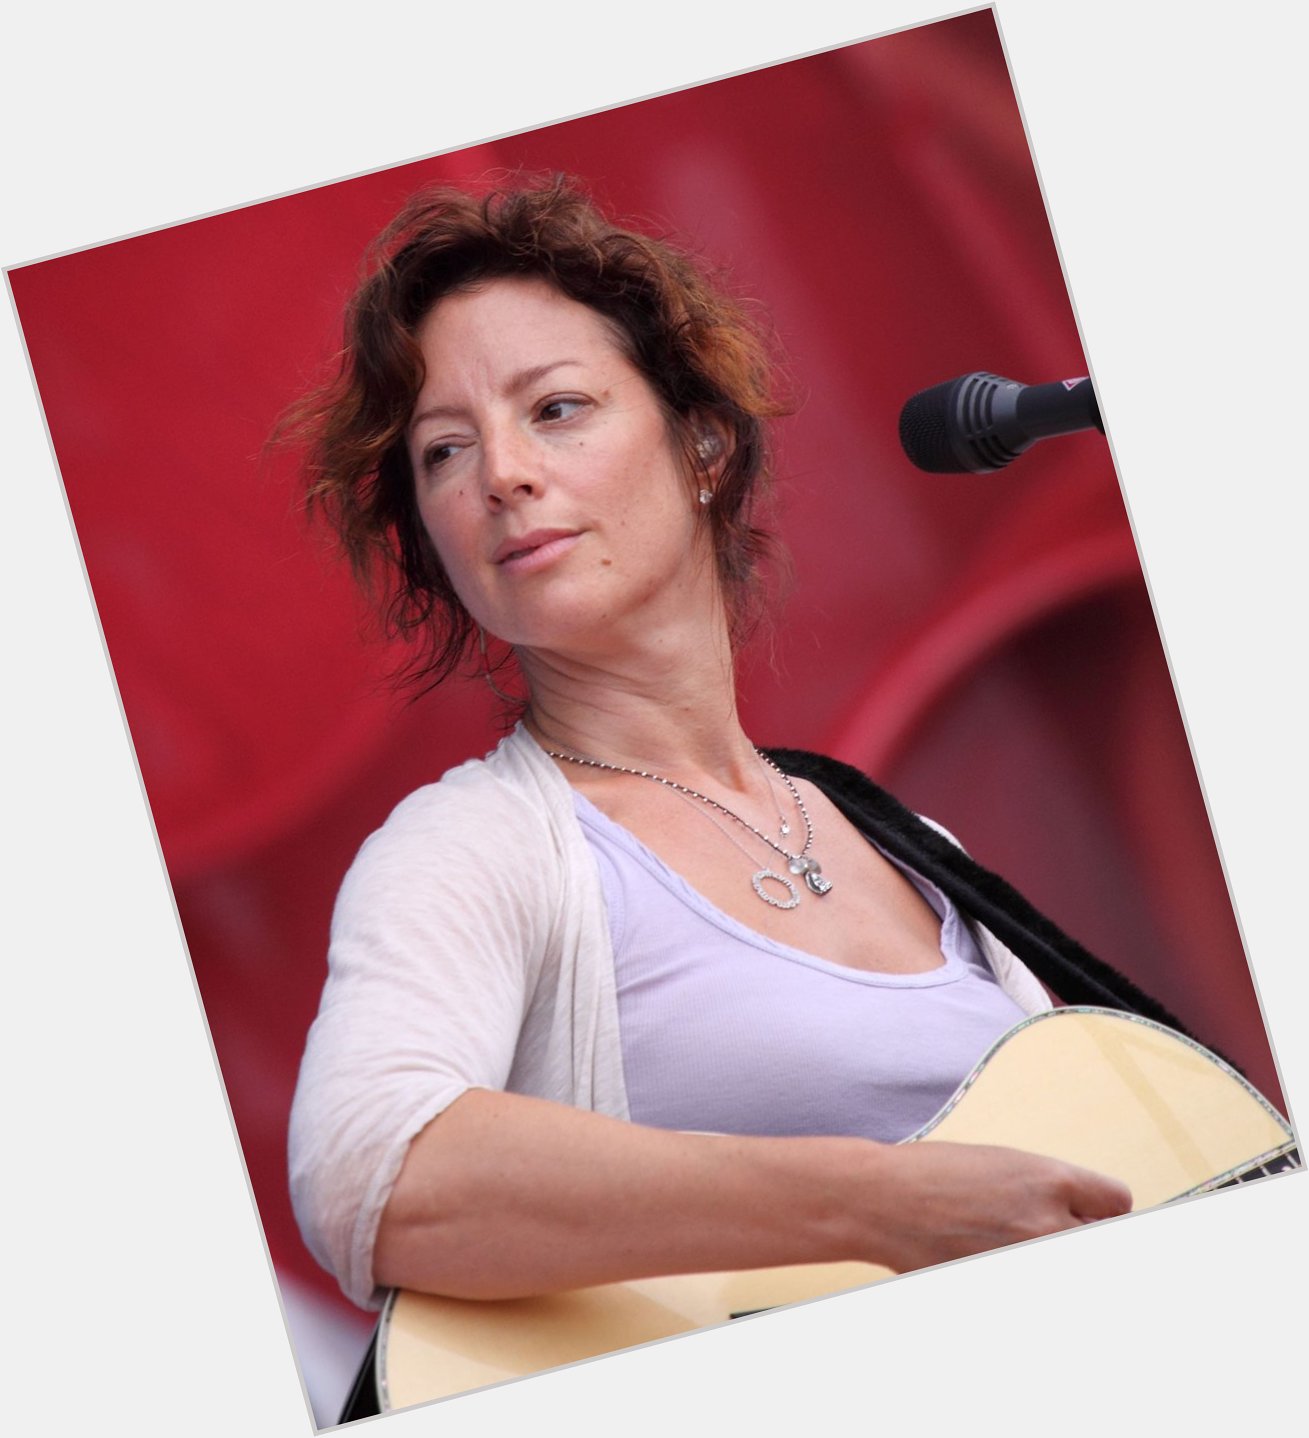 Please join me here at in wishing the one and only Sarah McLachlan a very Happy Birthday today  